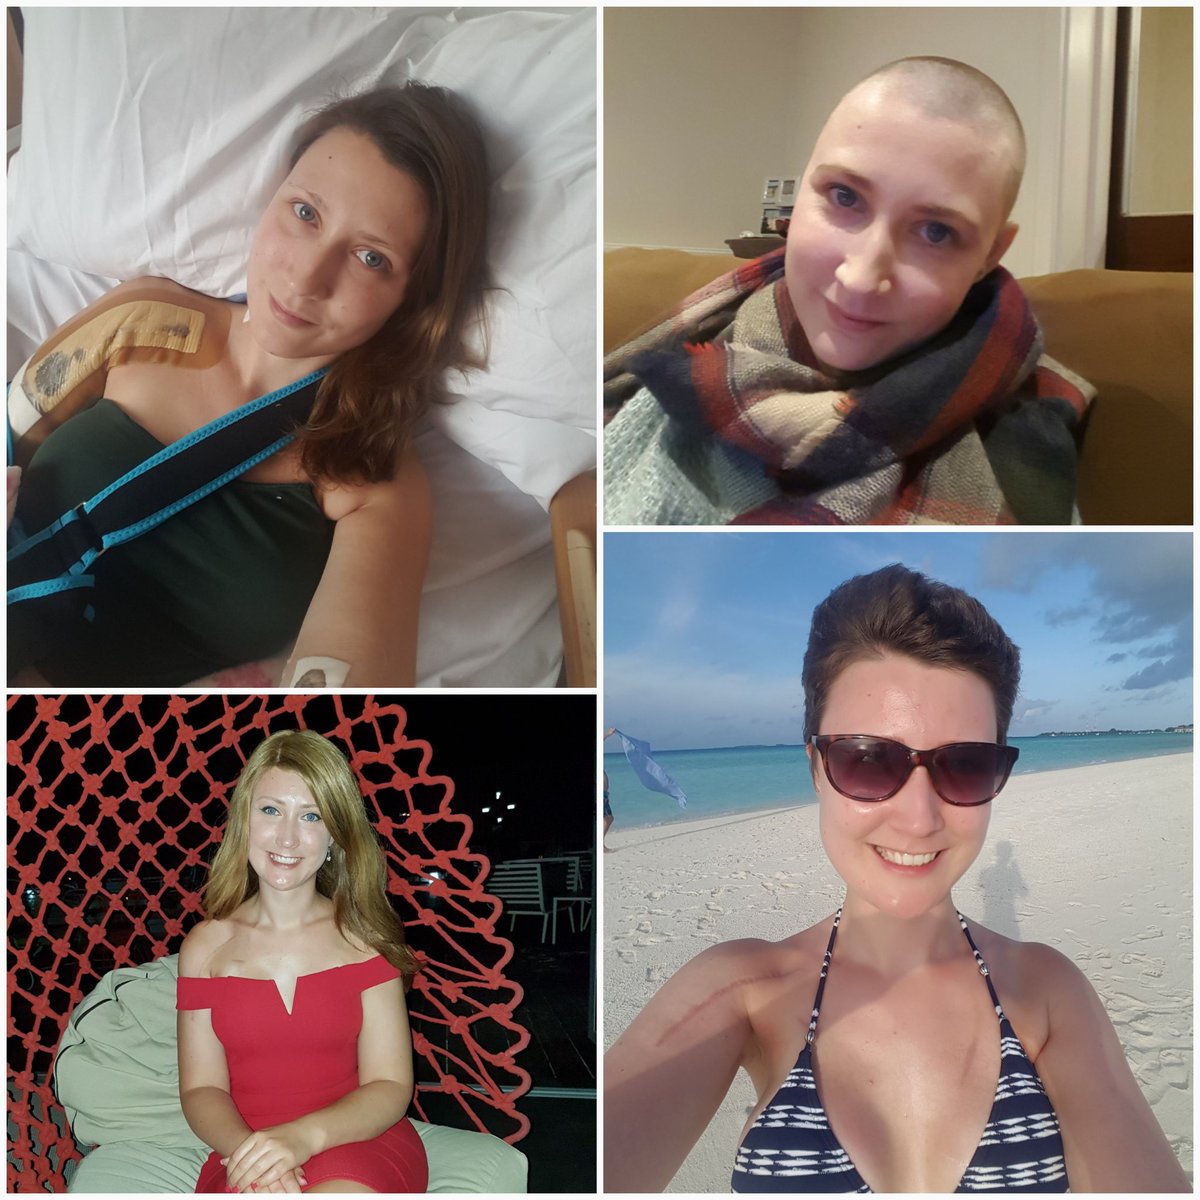 #Stage4breastcancer reality Doublemastectomy & recon,metal shoulder.12chemo, 3weekly treatment keeping me alive
#InvisiblyDisabledLooksLike